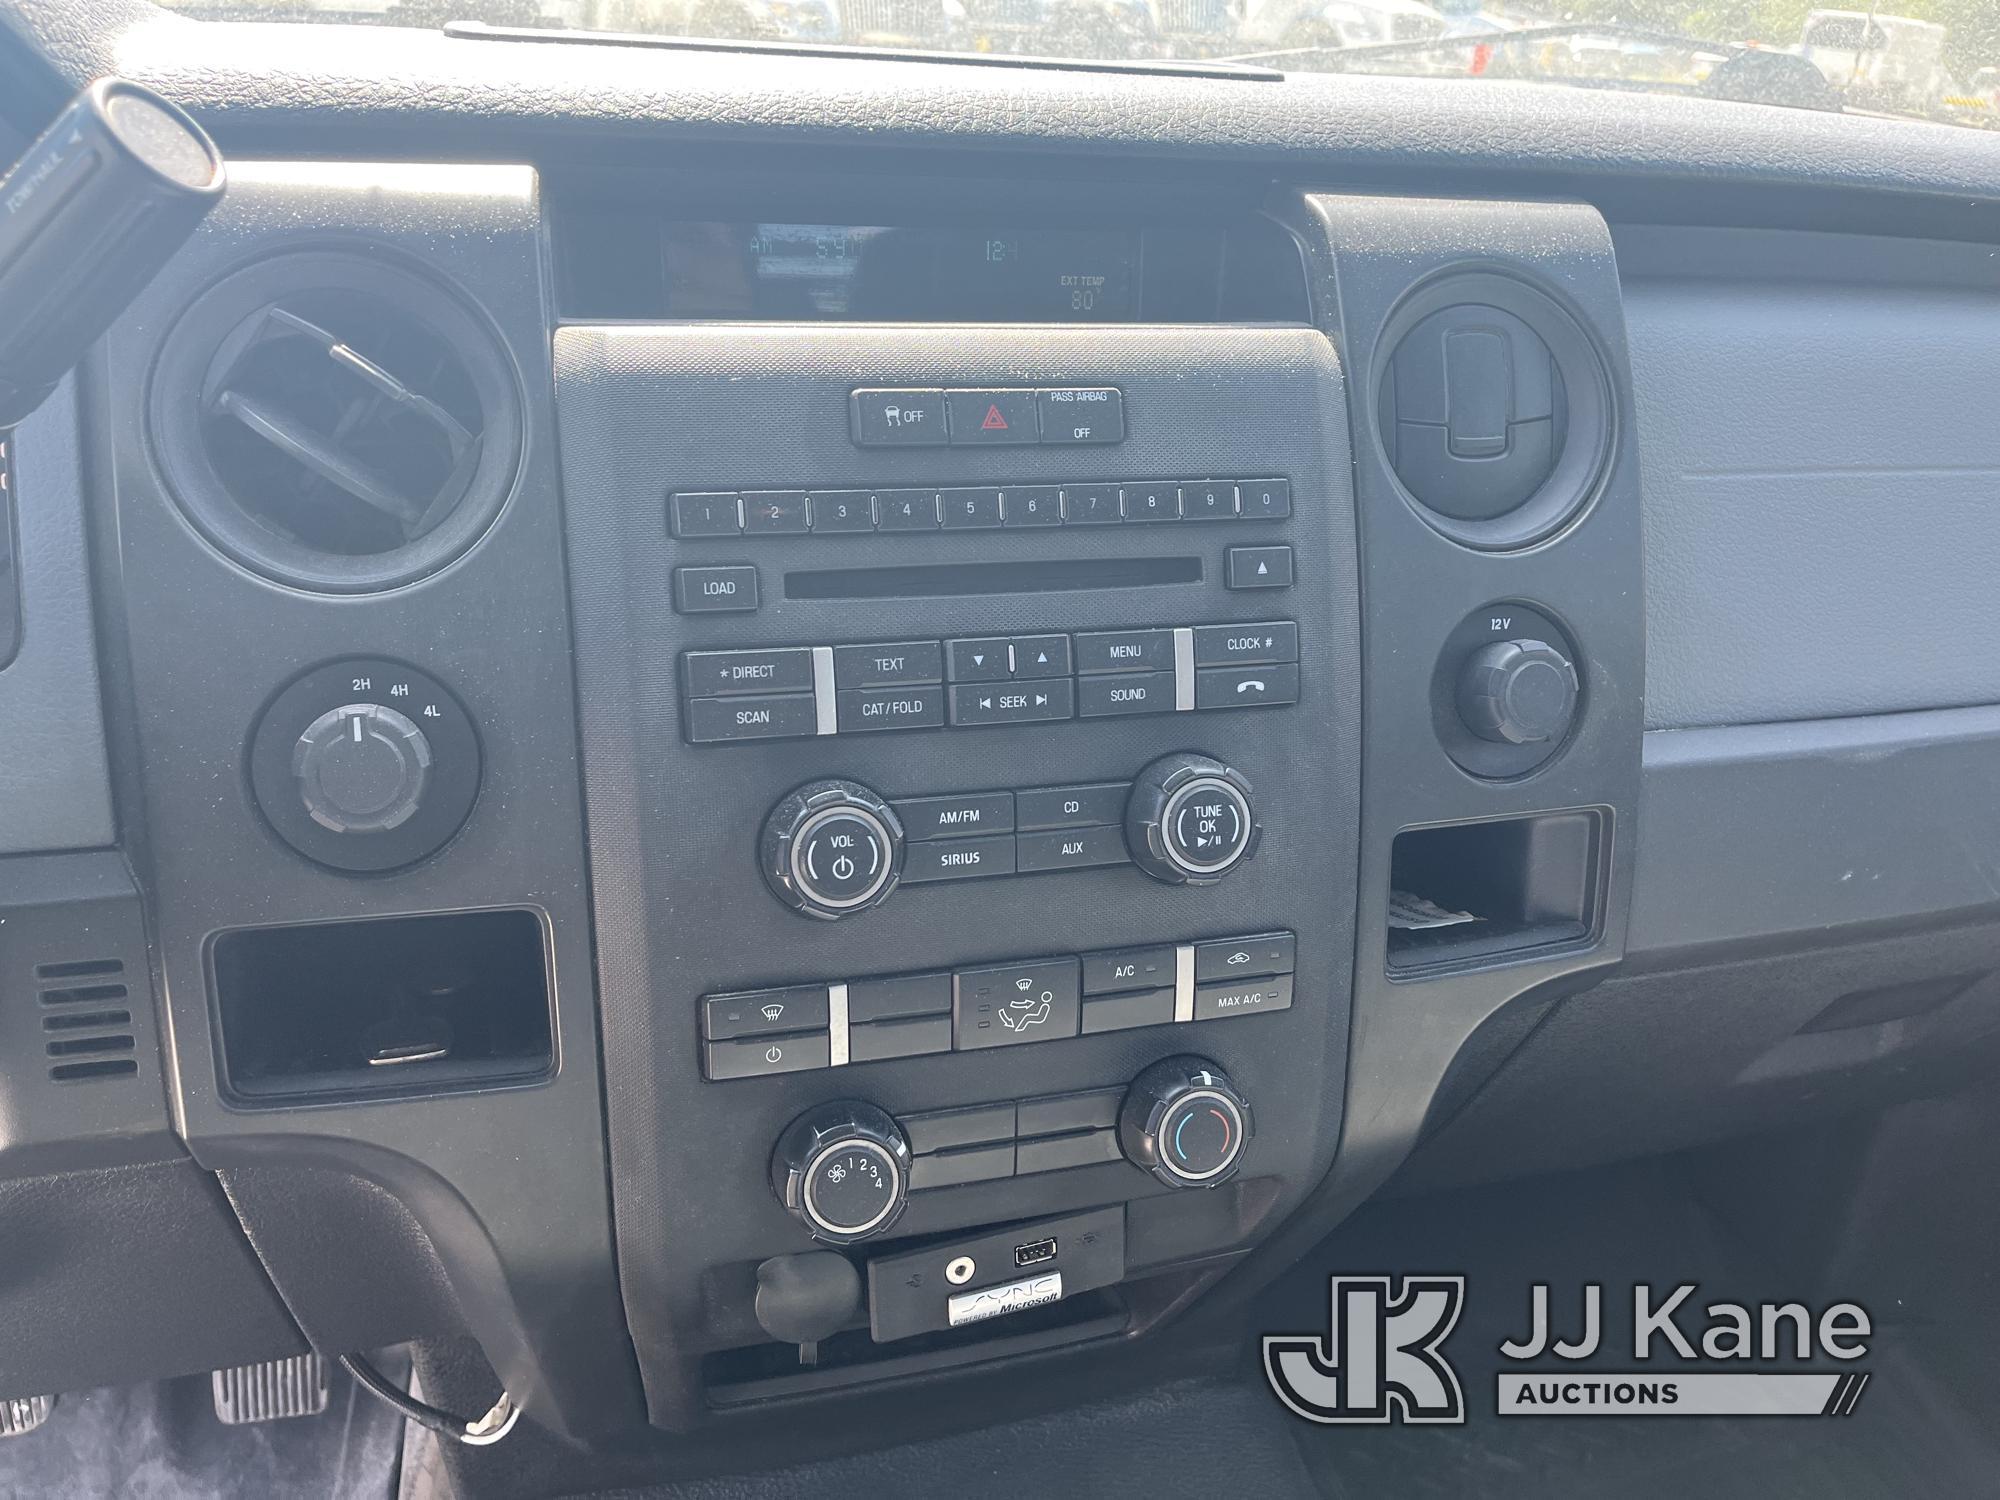 (Chester, VA) 2014 Ford F150 4x4 Extended-Cab Pickup Truck Runs & Moves